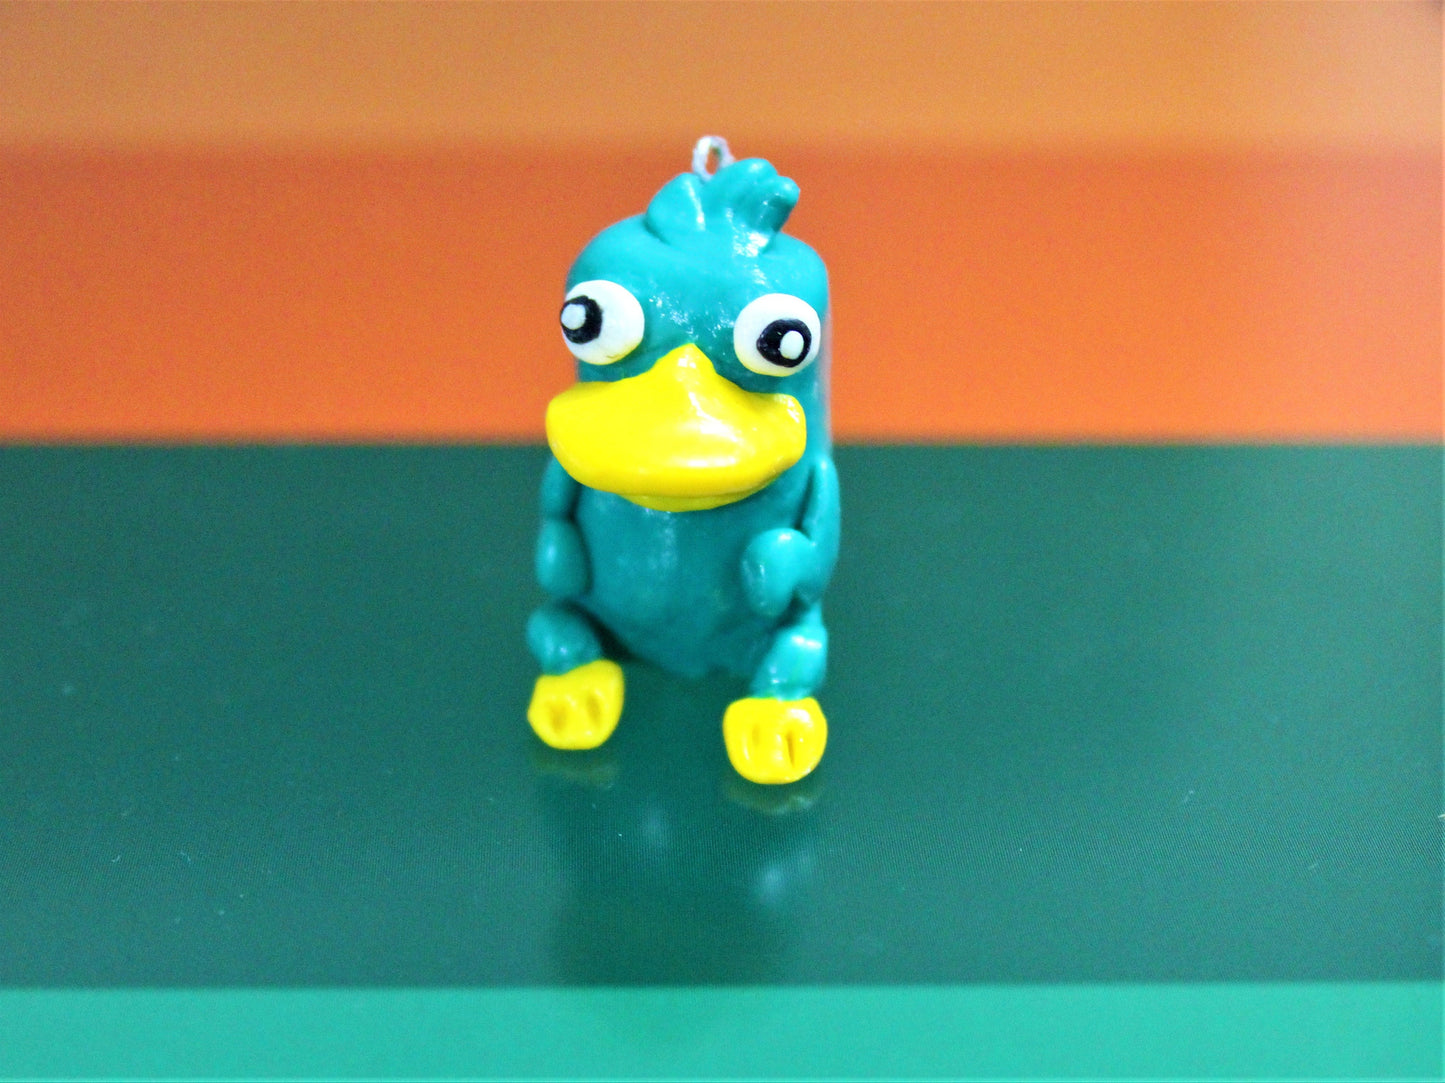 Platypus Perry Keychain/ Agent P figure, figurine, dolls, toys collectable/ earrings/ Phineas and Ferb